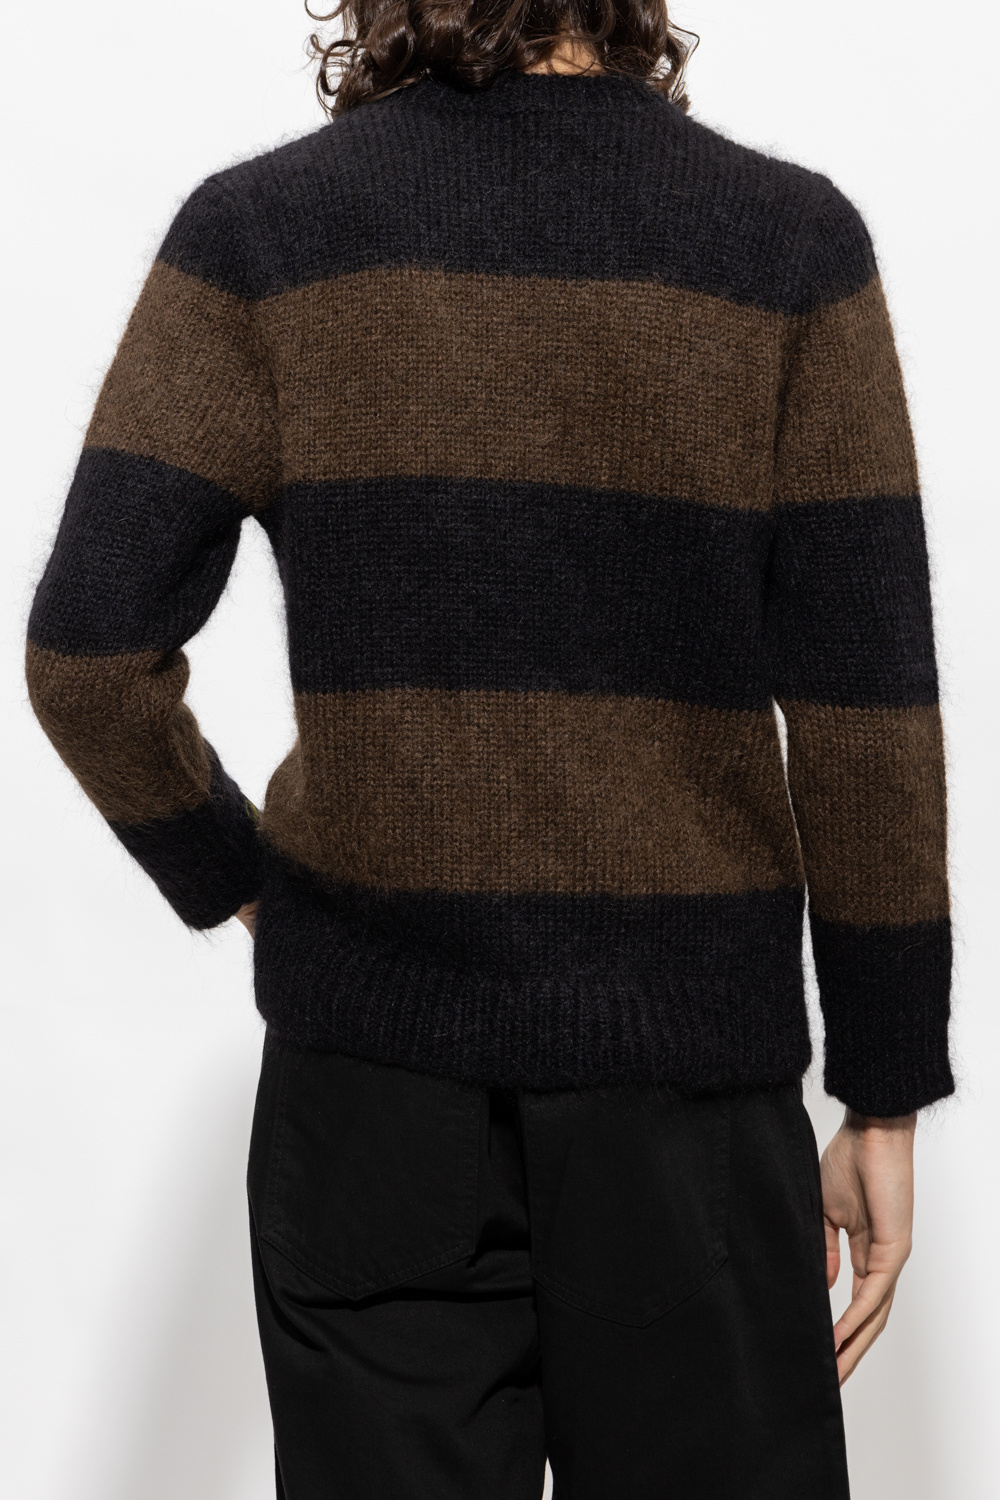 Raf Simons Striped tights sweater